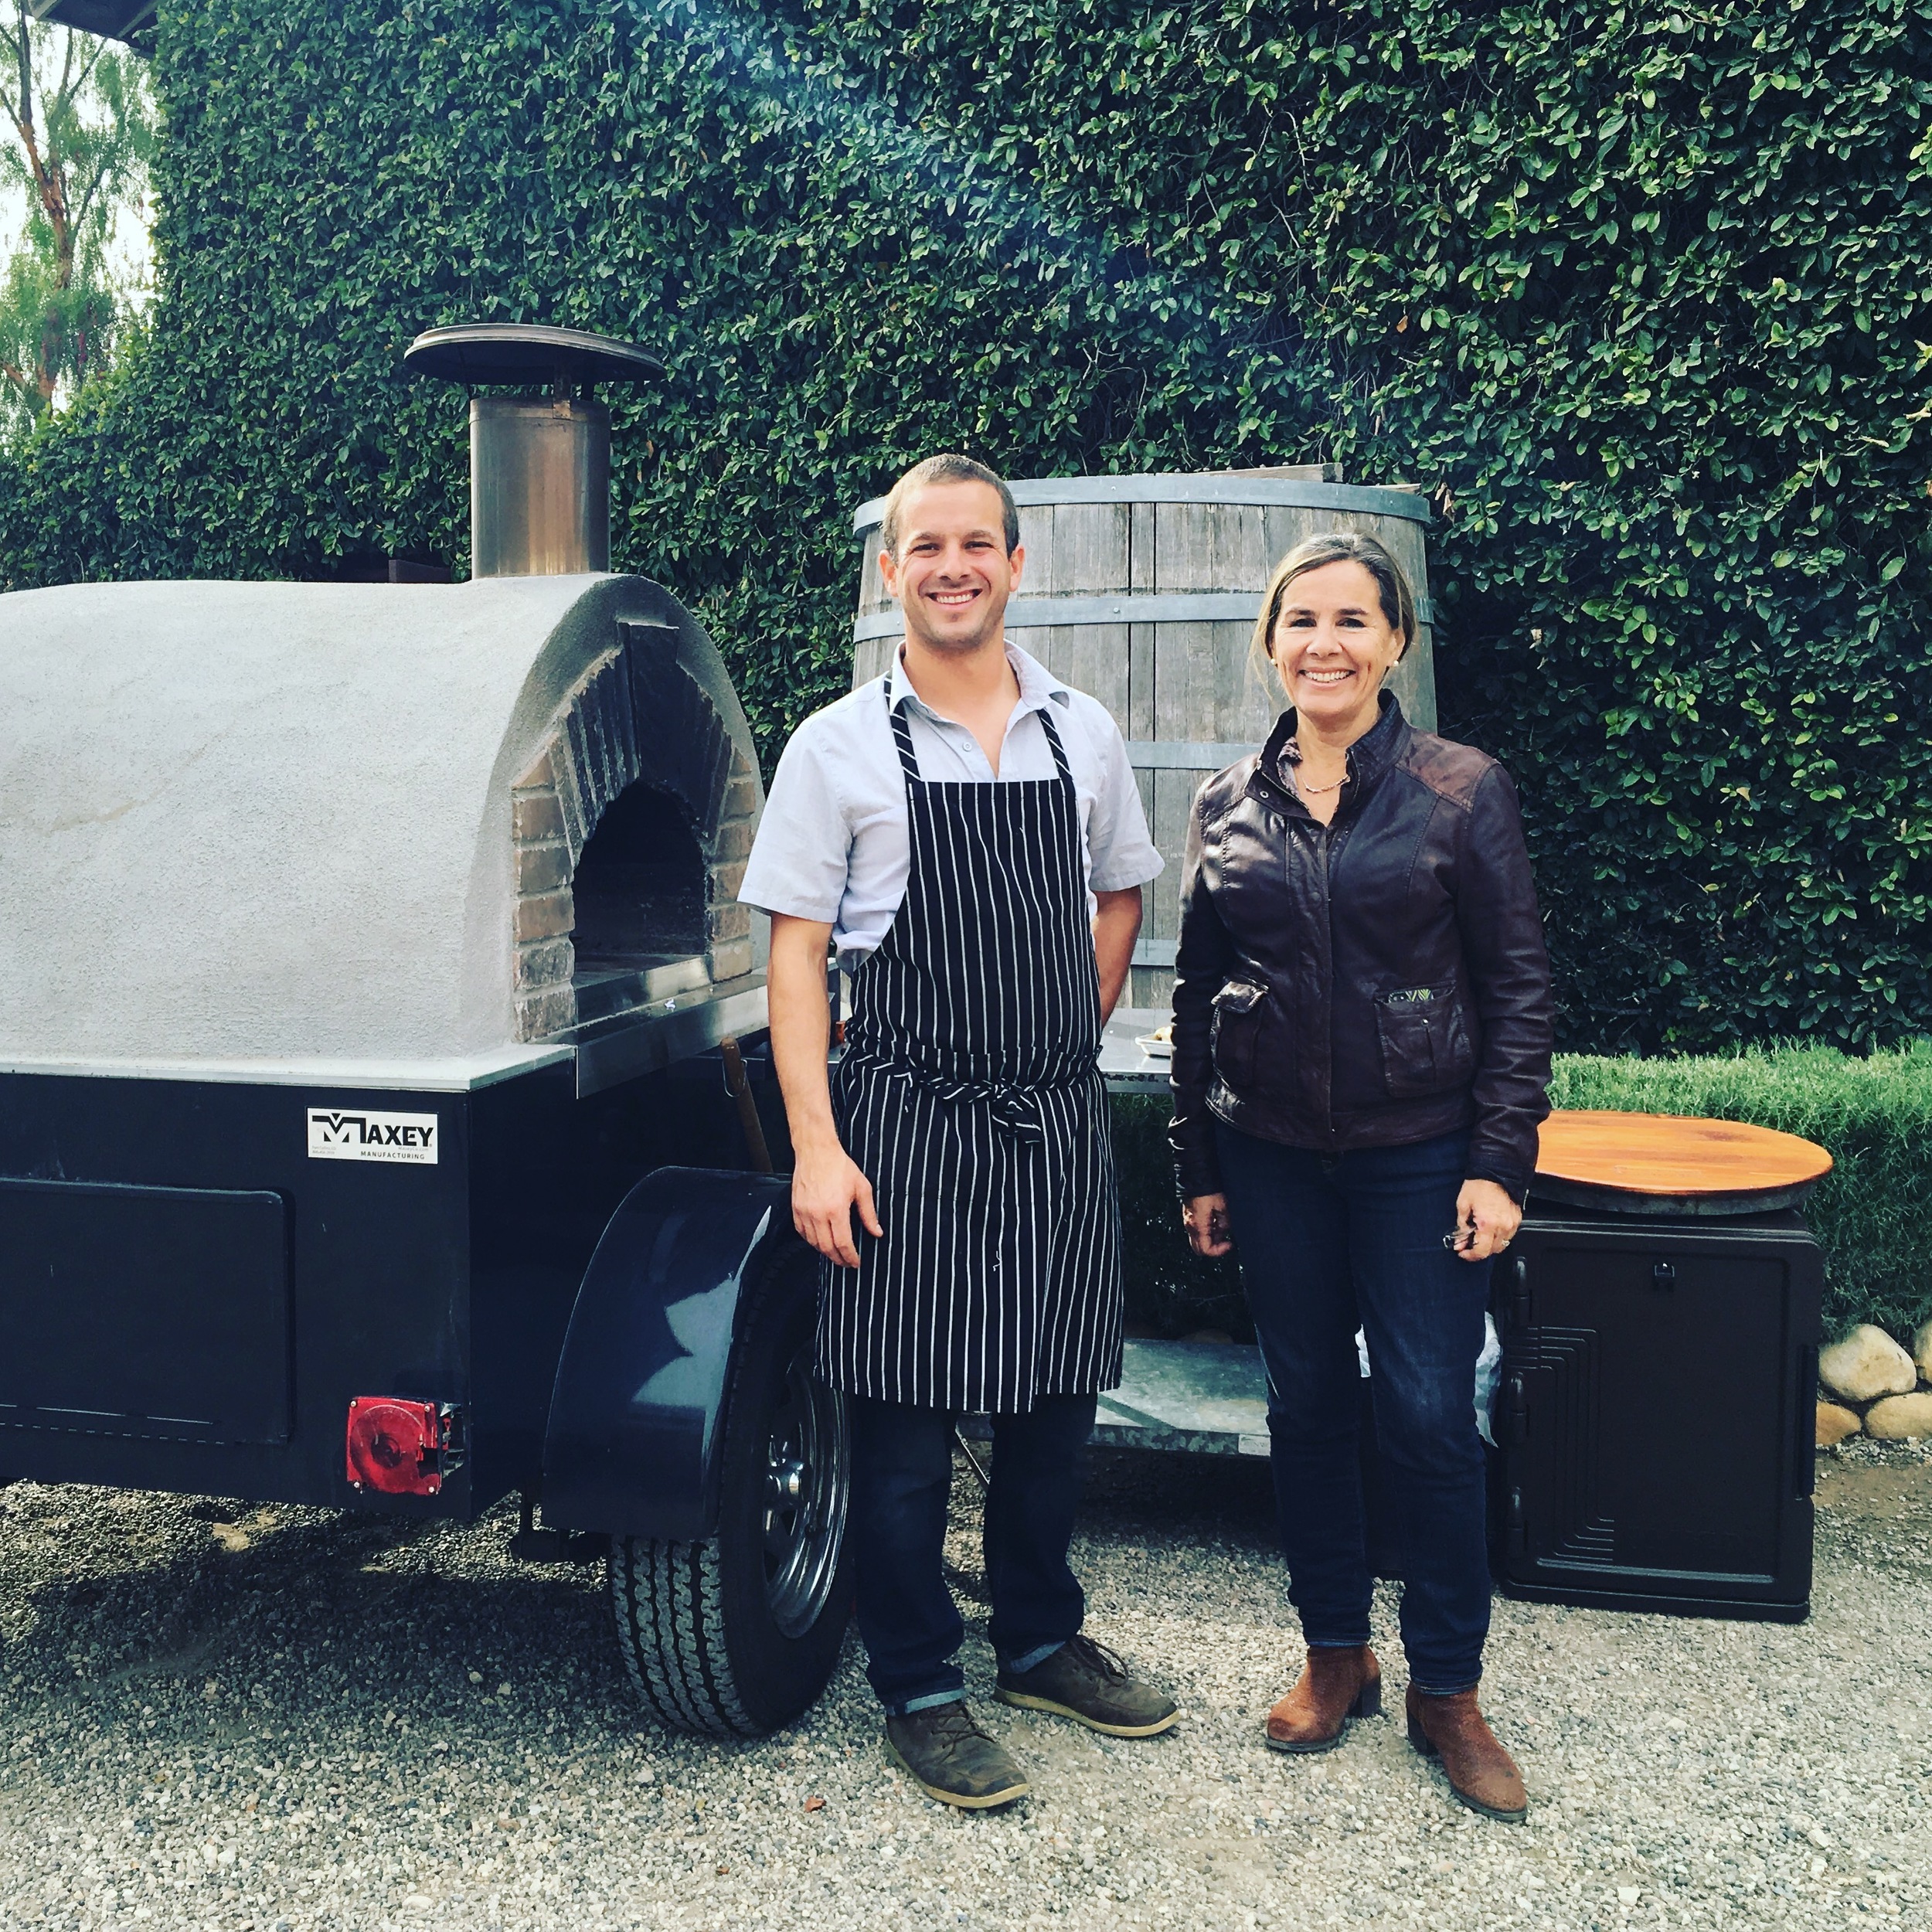                    Tomás and Malena with our mobile Wood-Fired oven at Brander Vineyard in Los Olivos.&nbsp; 